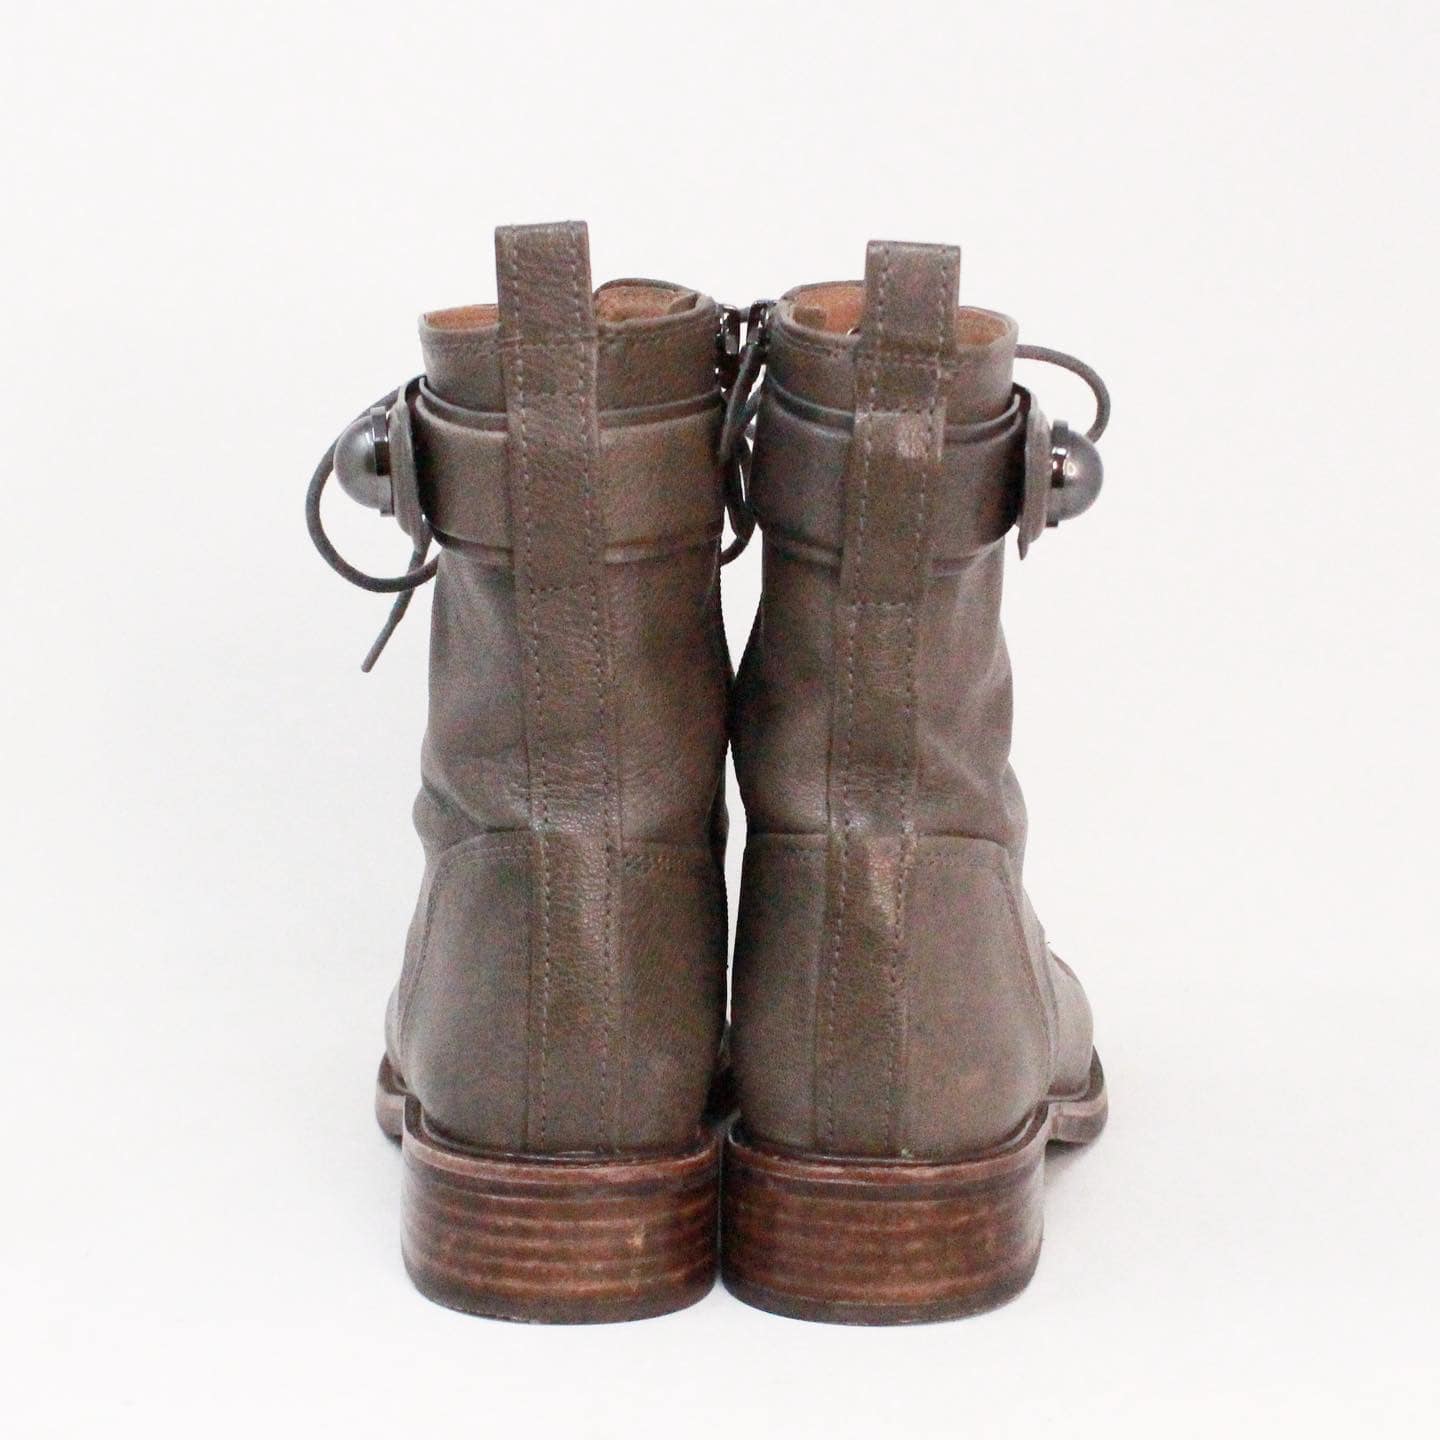 LOUISE ET CIE #38961 Gray Leather Boots (US 7.5 EU 37.5) – ALL YOUR BLISS